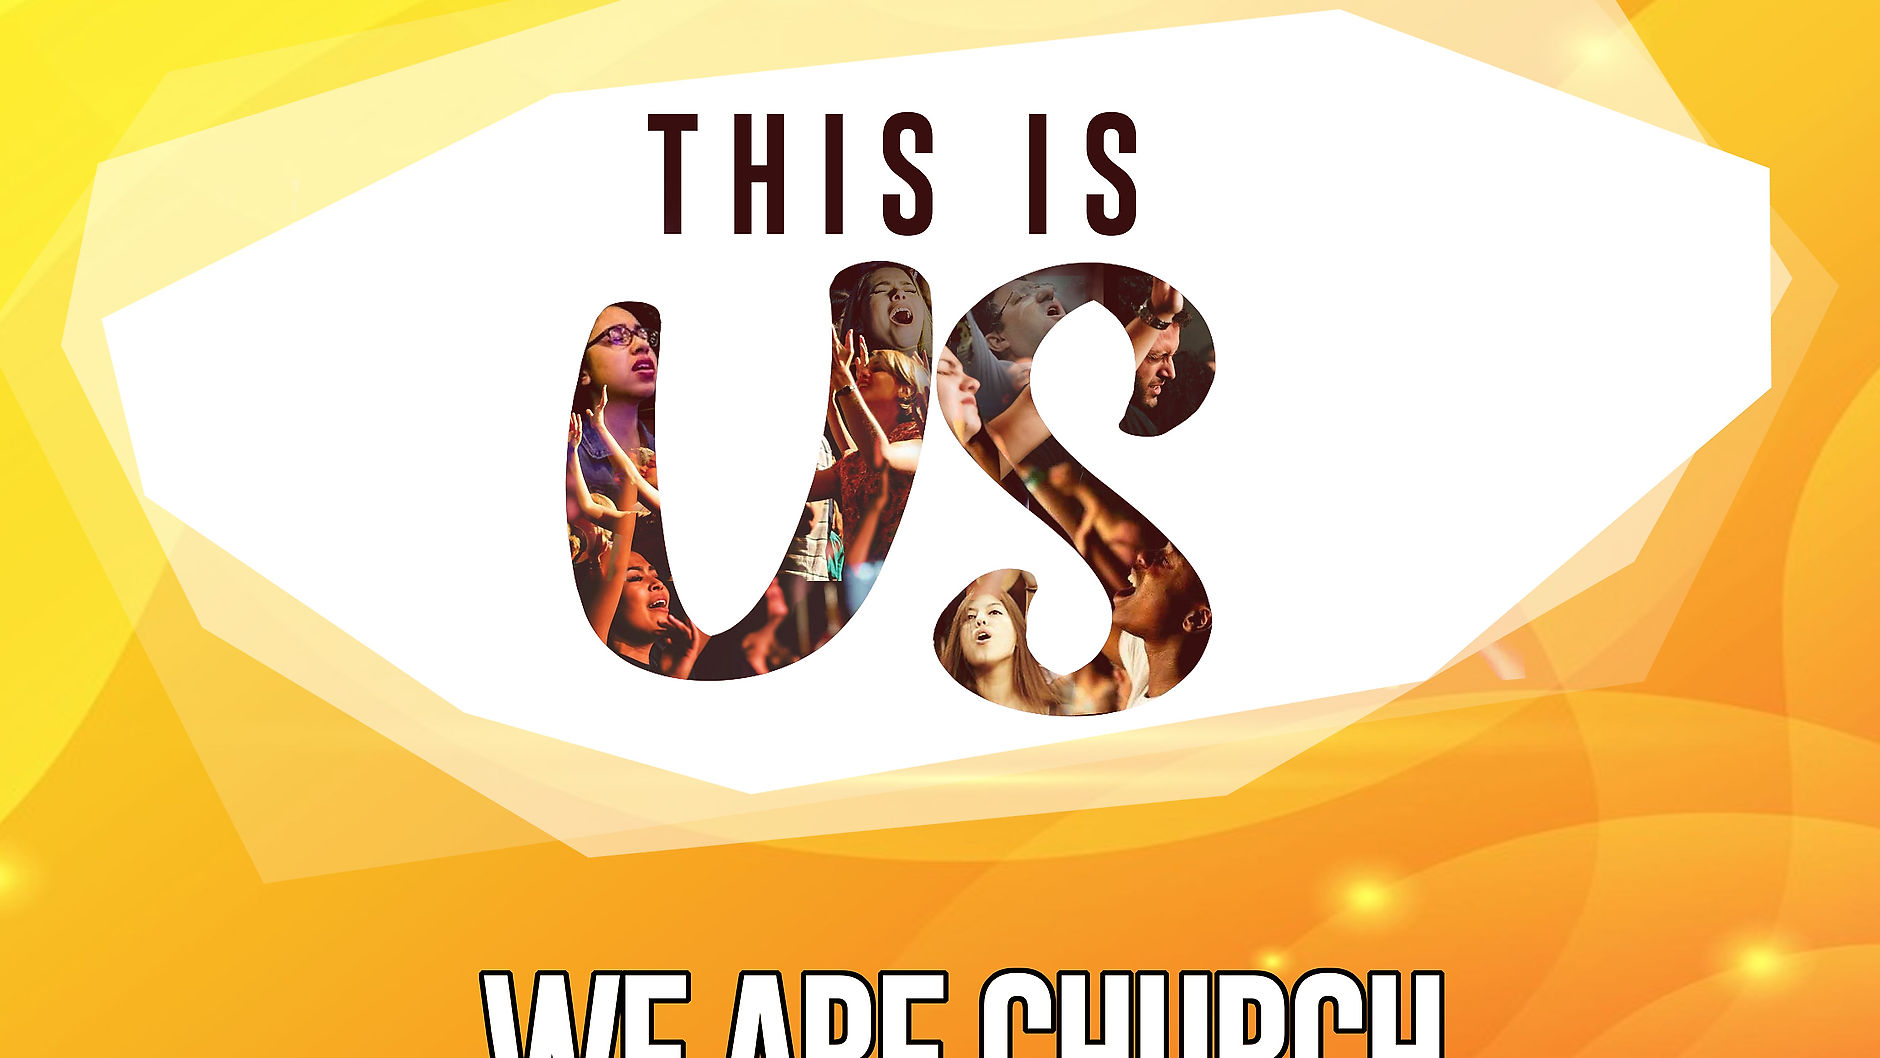 THIS IS US - WE ARE CHURCH!